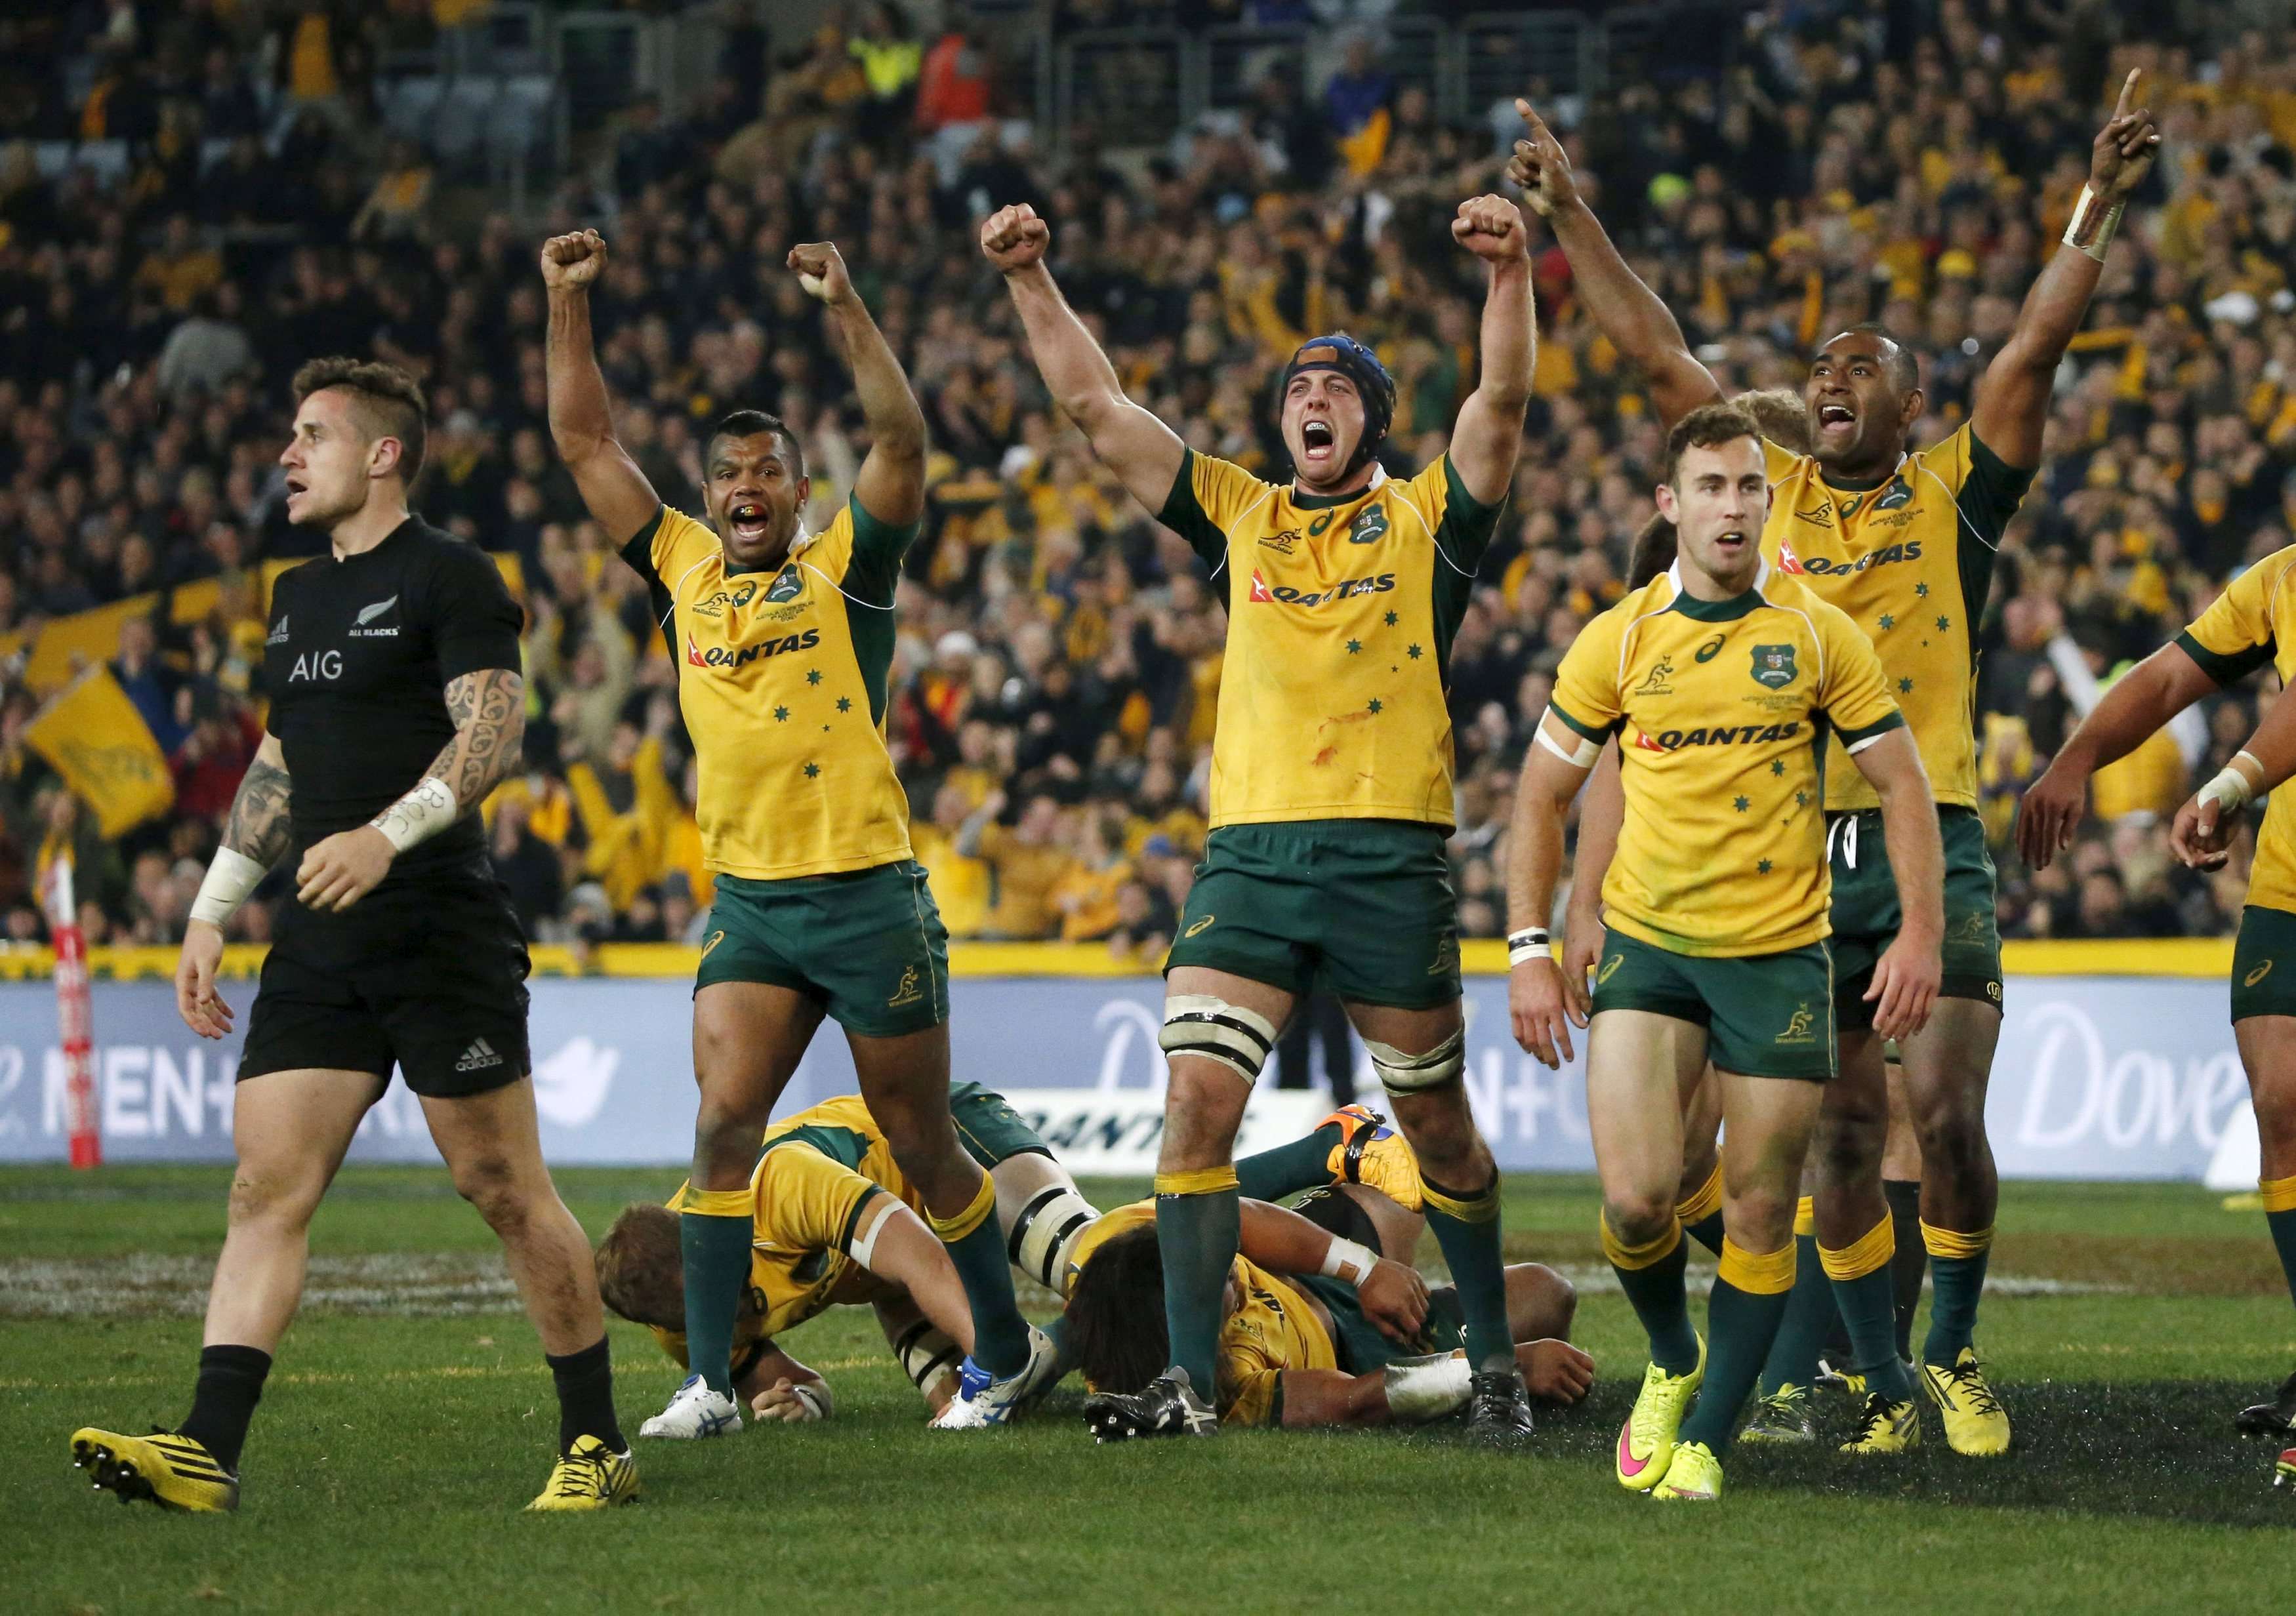 Australian rugby’s recent achievements on the field haven’t been matched by its performance off it. Photo: Reuters